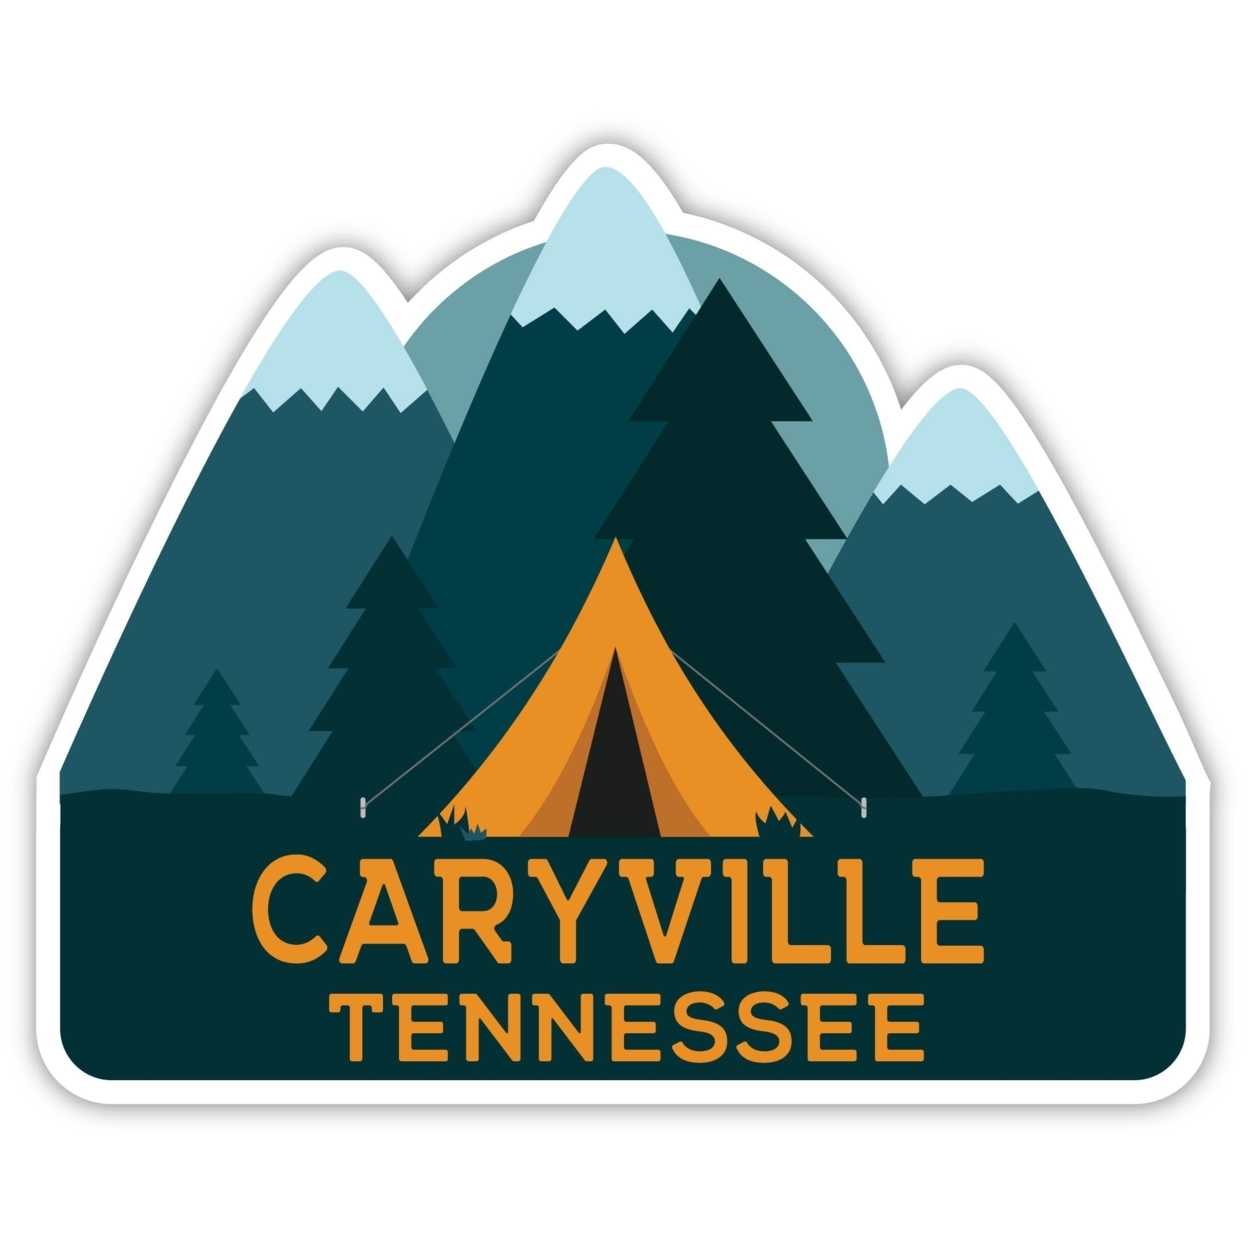 Caryville Tennessee Souvenir Decorative Stickers (Choose Theme And Size) - Single Unit, 8-Inch, Bear